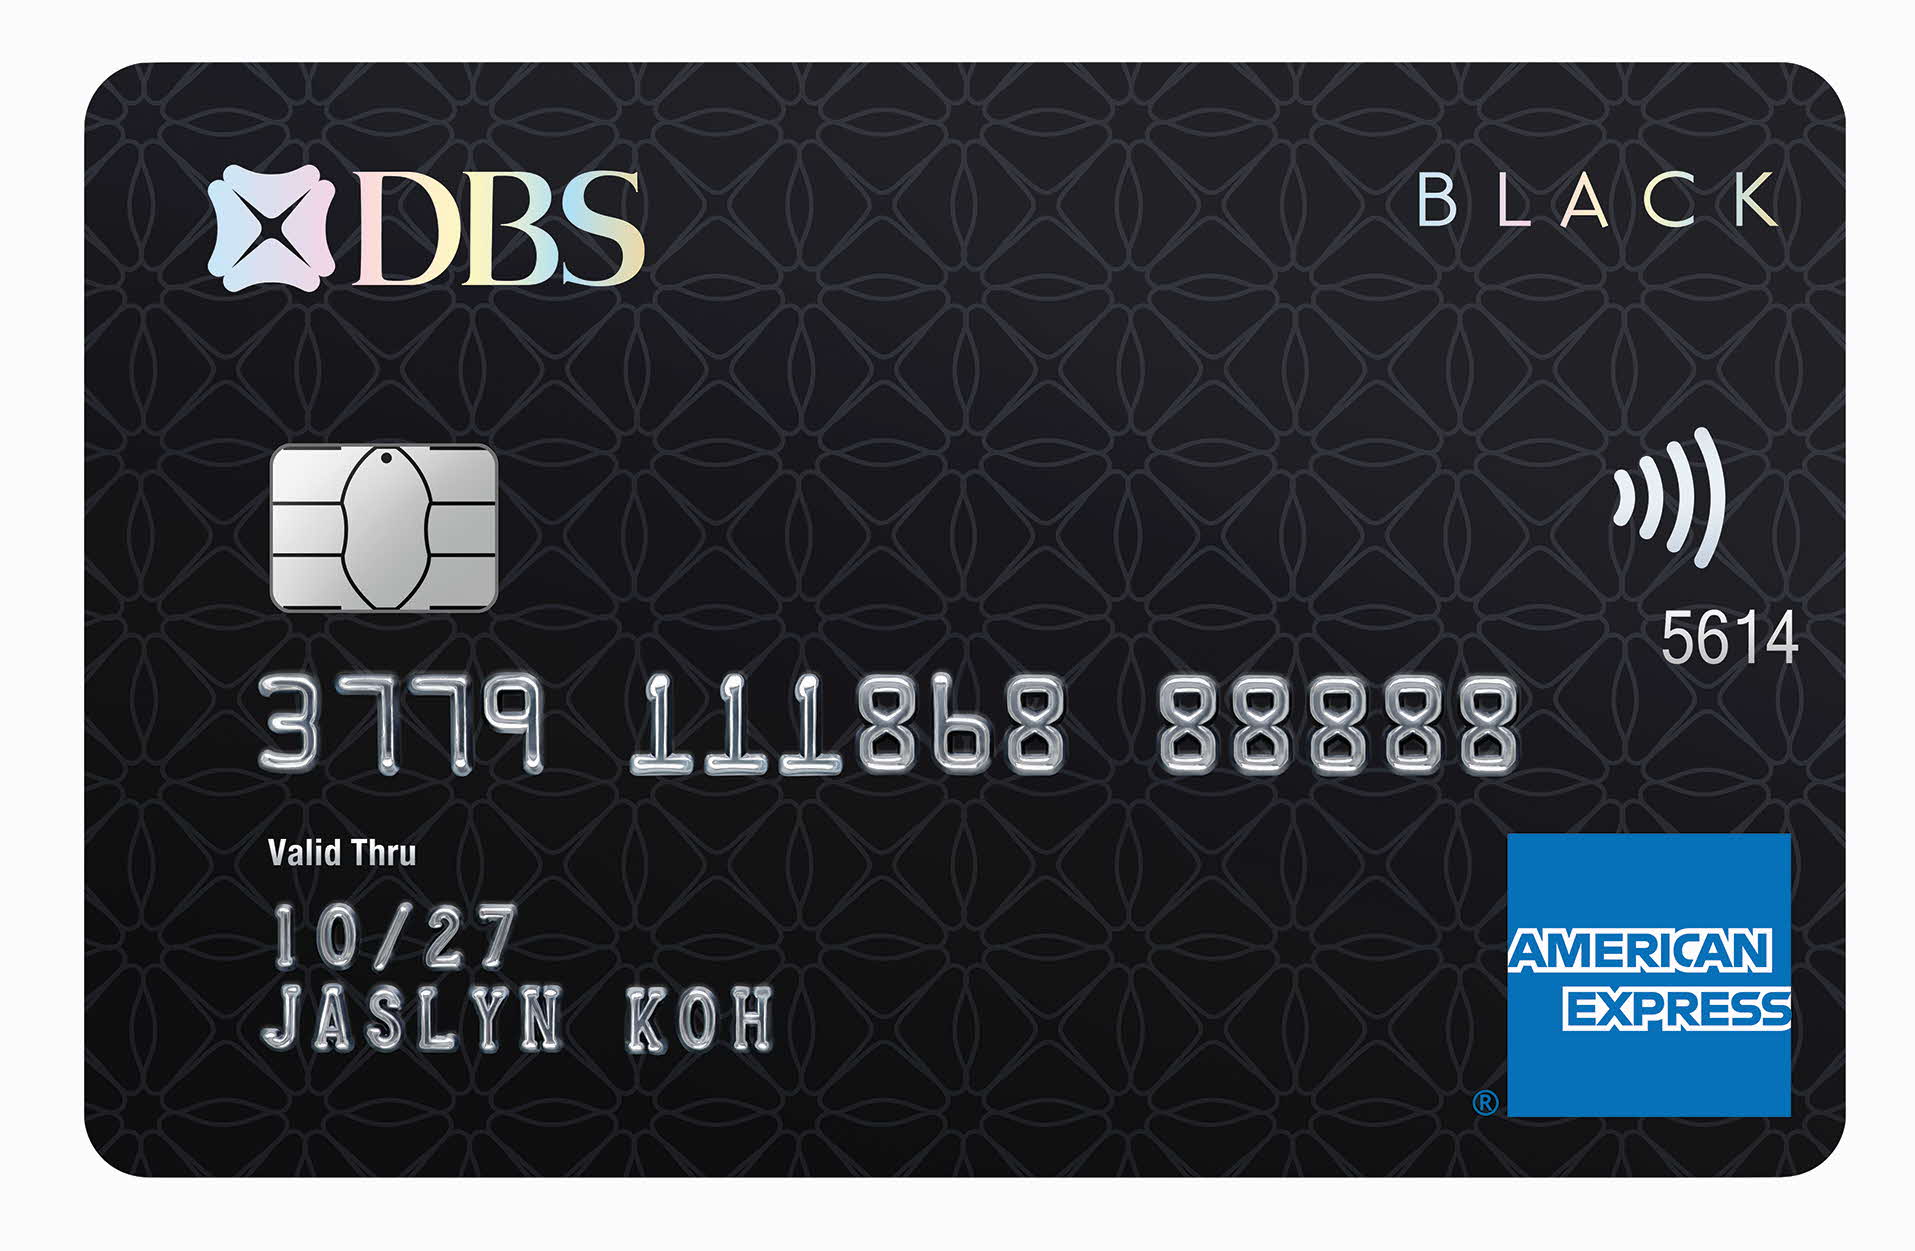 get-up-to-s-10-cash-rebate-on-your-contactless-spend-with-dbs-american